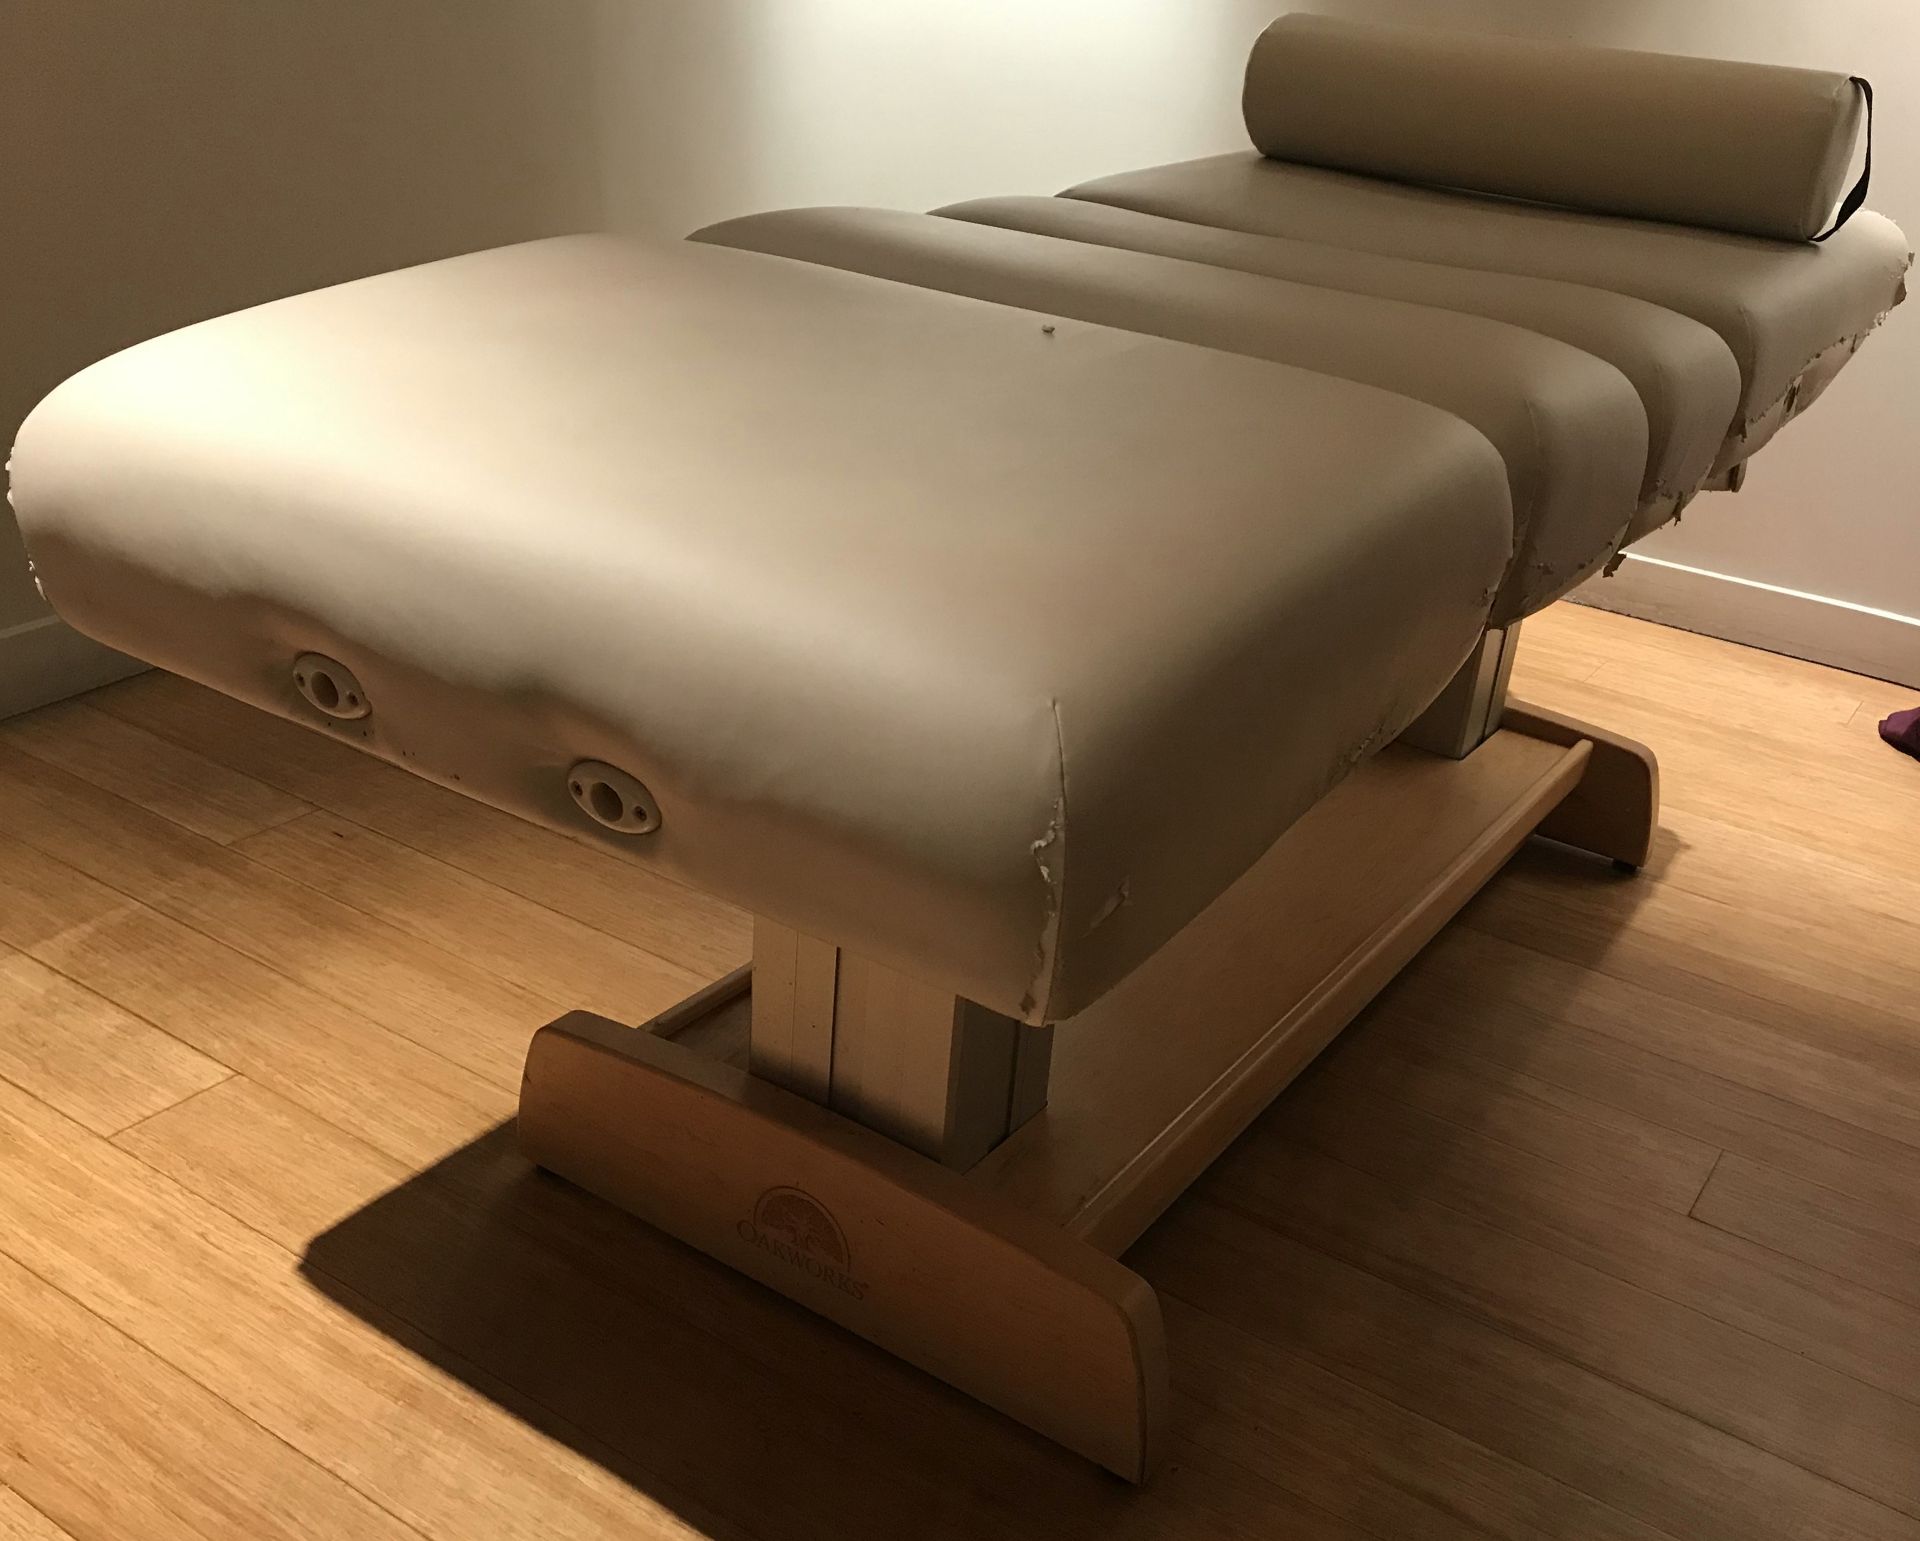 1 x Oakworks Clinician Electric-Hydraulic Massage Table With Footpedal and Linak HBWO Remote Control - Image 4 of 11